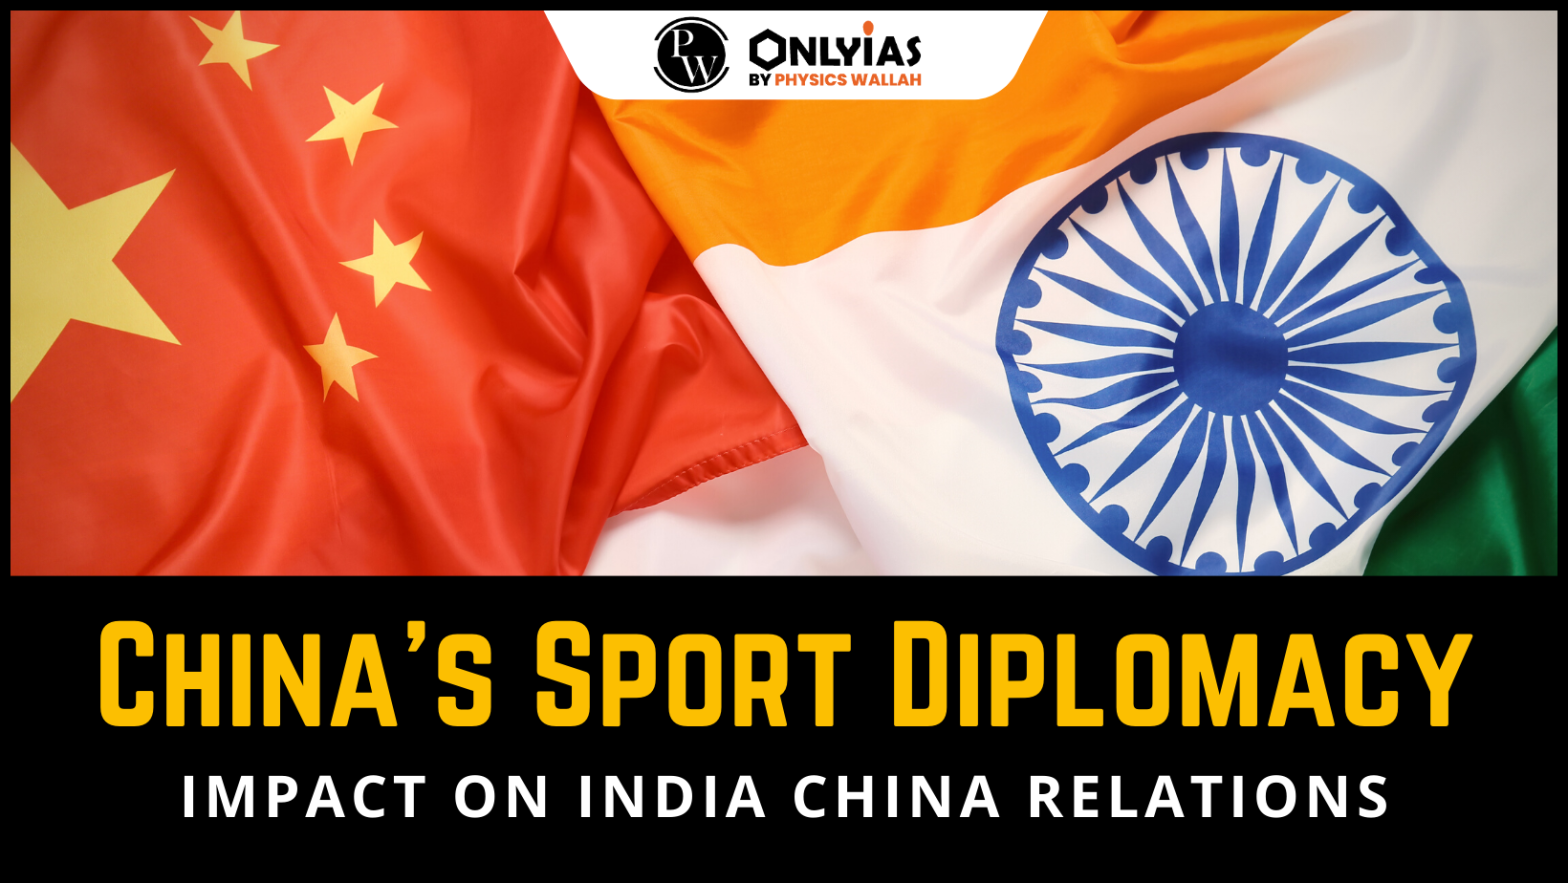 China’s Sport Diplomacy: Impact on India China Relations | PWOnlyIAS 2023